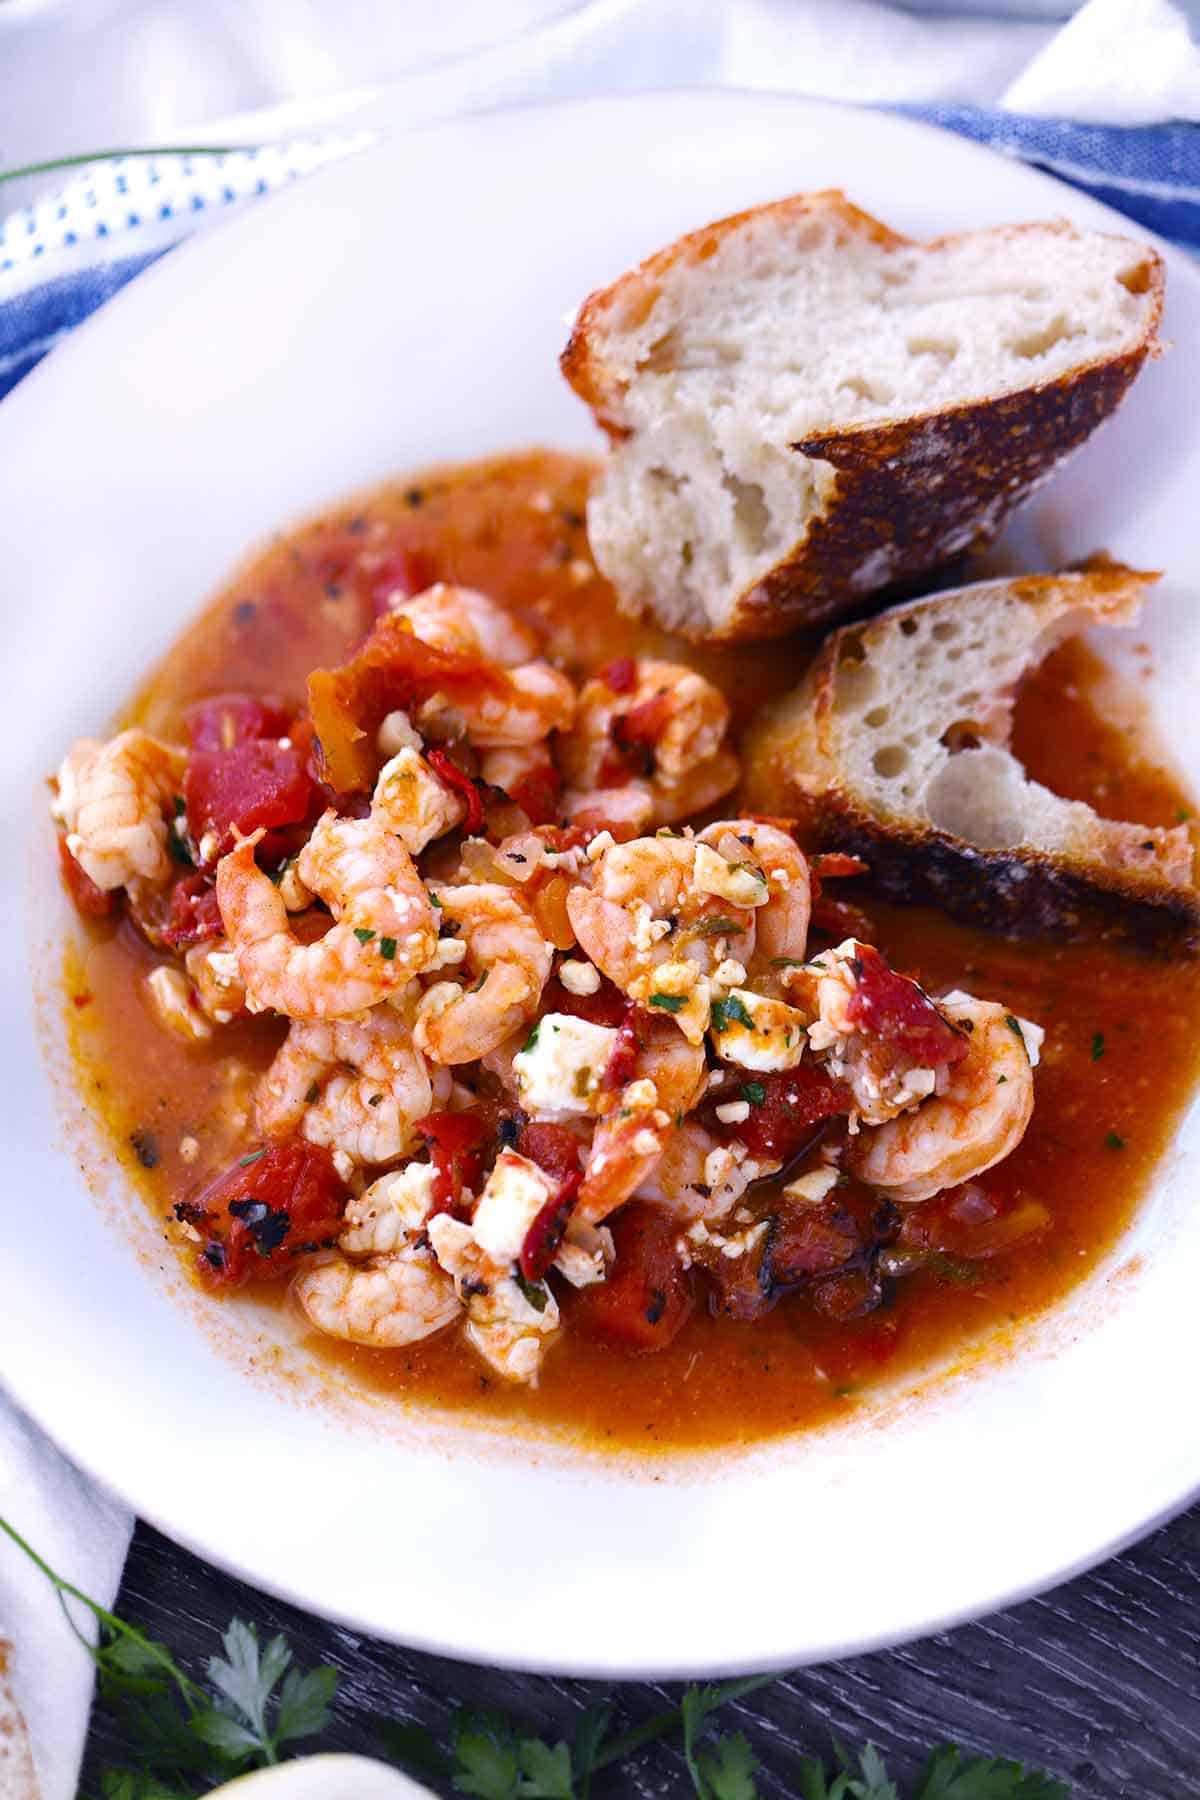 Greek shrimp with feta and tomatoes on a plate with sourdough.